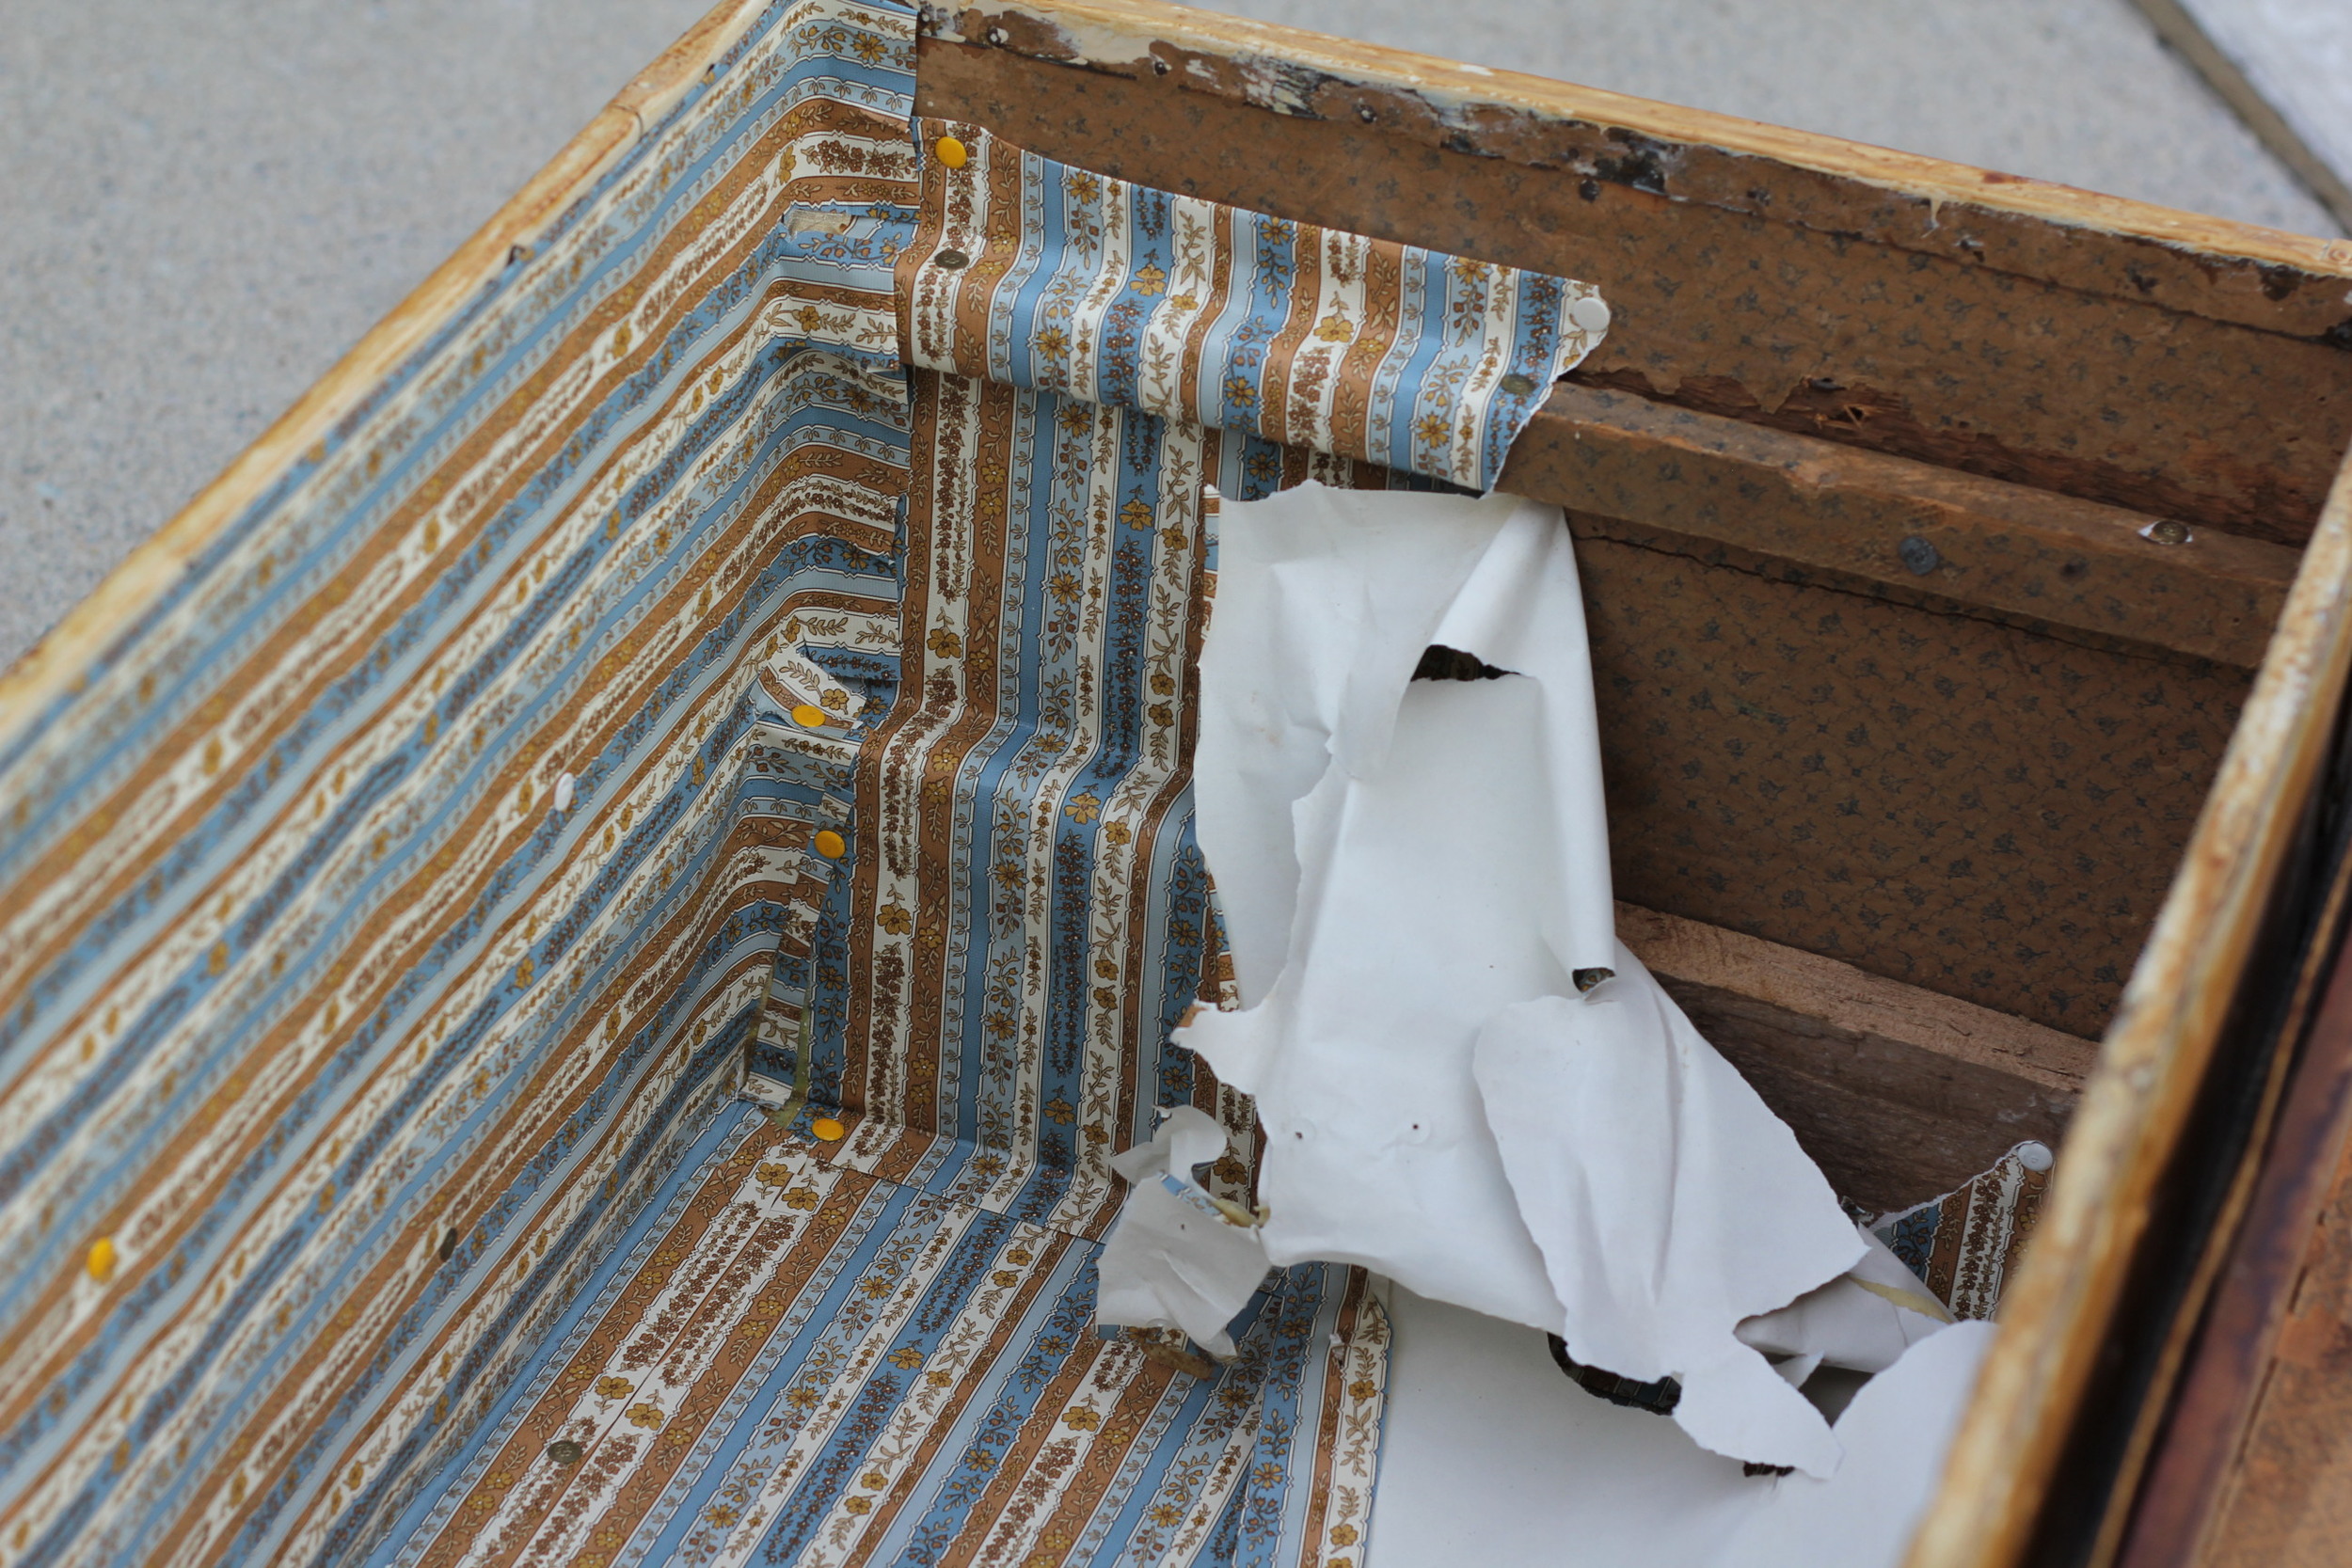 Saving the Steamer Trunk — Highstyle ReStyle